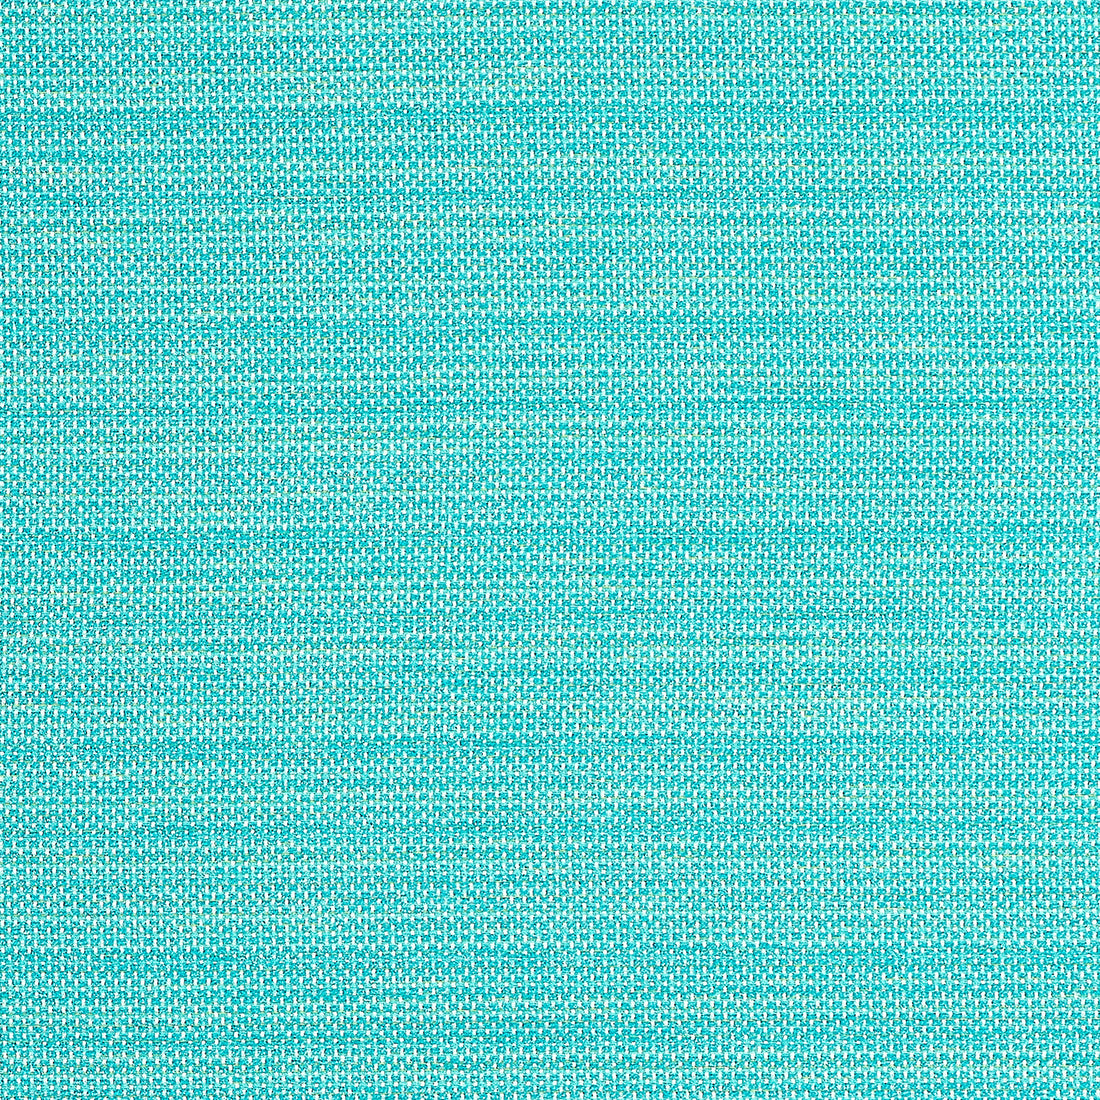 Cameron fabric in capri color - pattern number W81647 - by Thibaut in the Locale collection